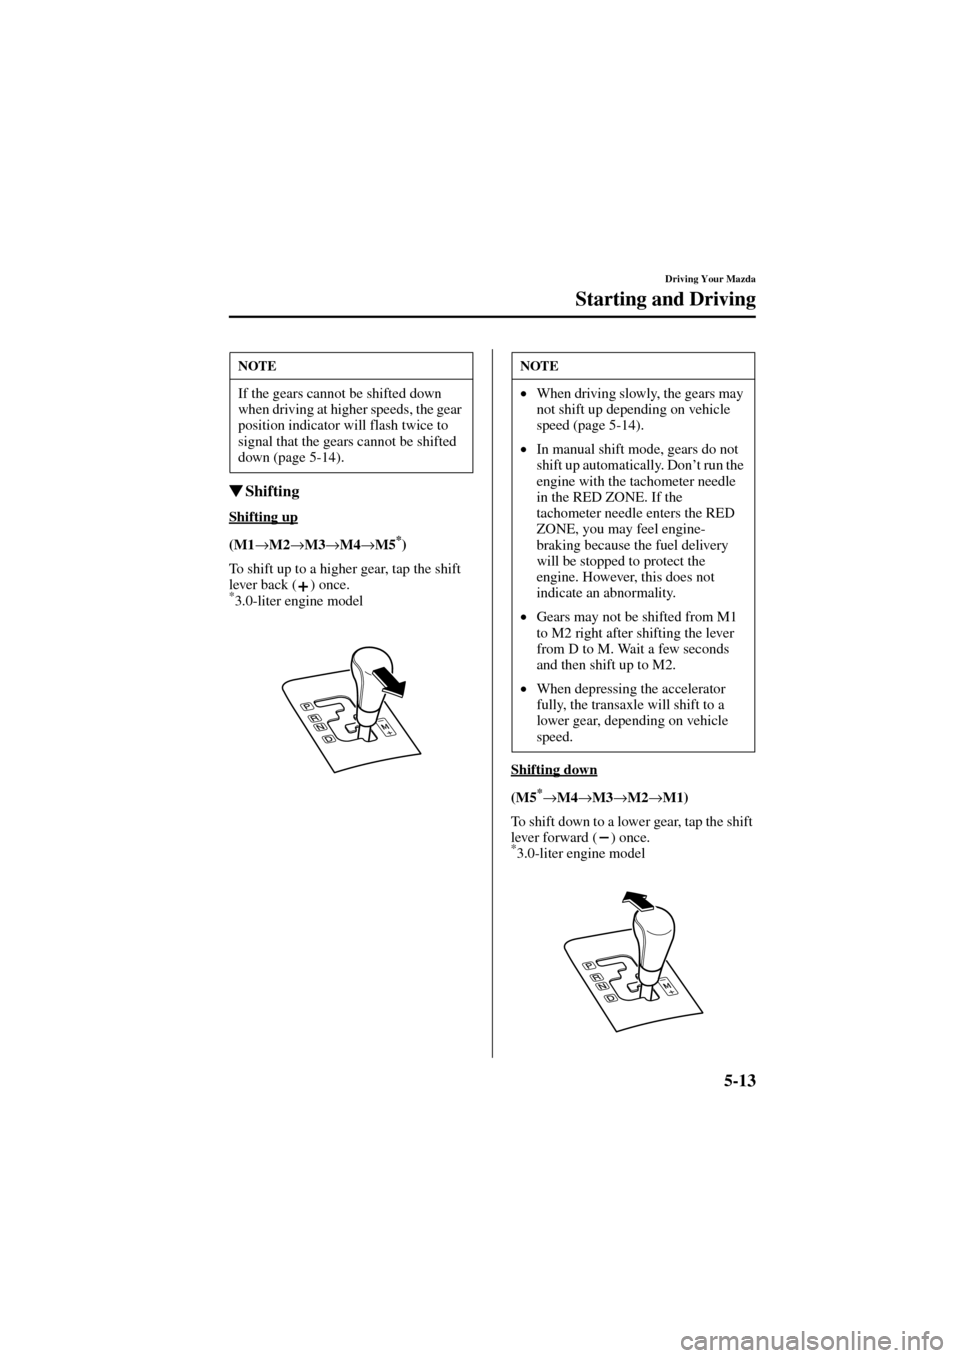 MAZDA MODEL 6 2004  Owners Manual (in English) 5-13
Driving Your Mazda
Starting and Driving
Form No. 8R29-EA-02I
Shifting
Shifting up
(M1→M2→M3→M4→M5*)
To shift up to a higher gear, tap the shift 
lever back ( ) once.
*3.0-liter engine mo